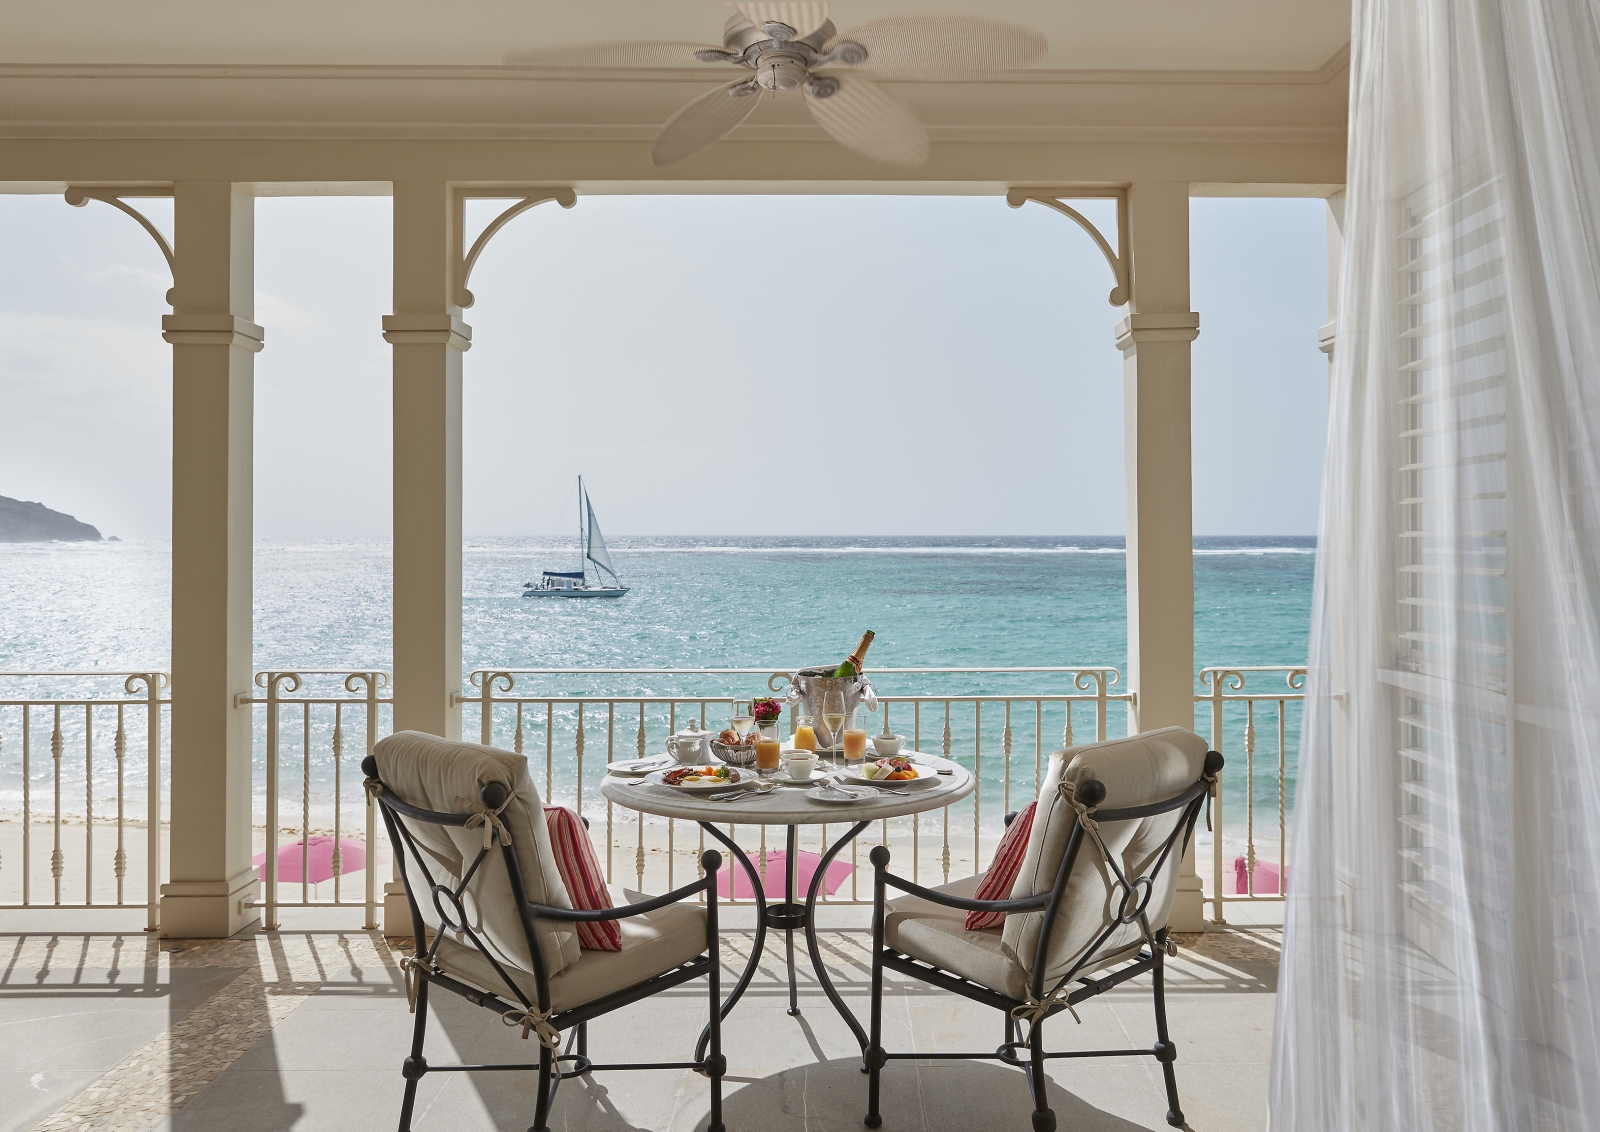 two chairs and a bottle of champagne on a balcony overlooking the ocean